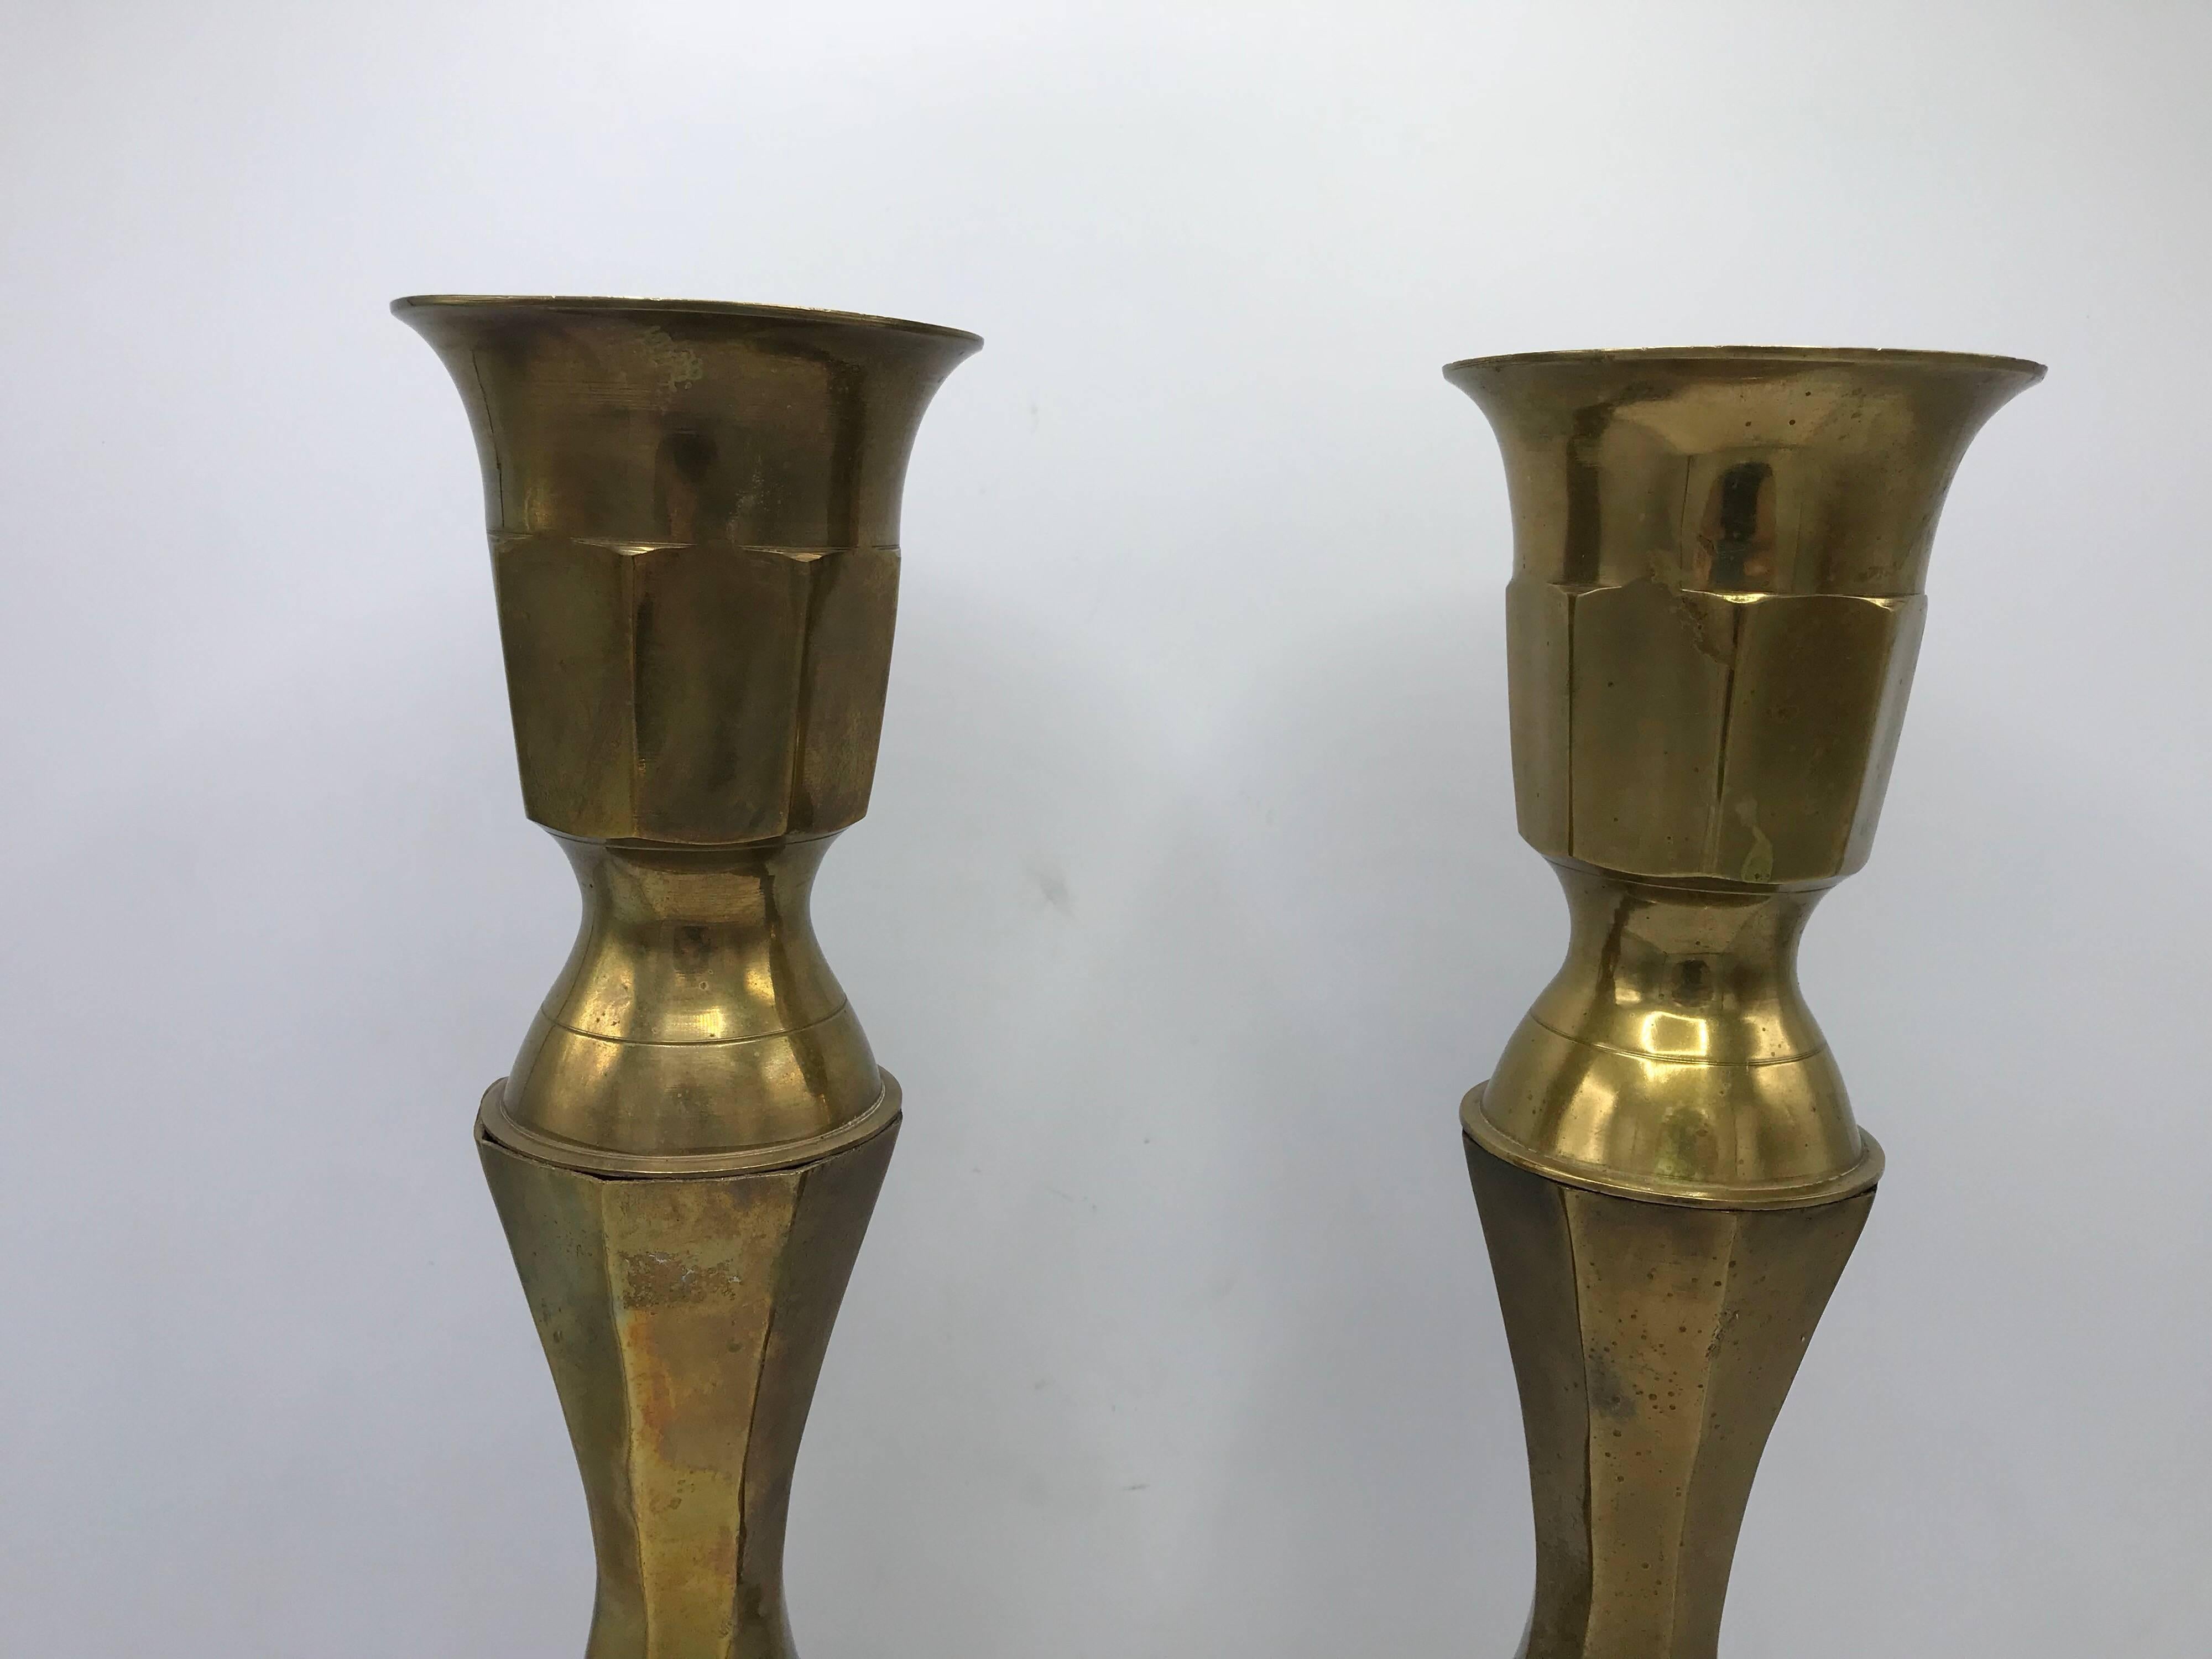 Offered is a beautiful and substantial, pair of 1950s large brass candlesticks. Lovely all-over patina.